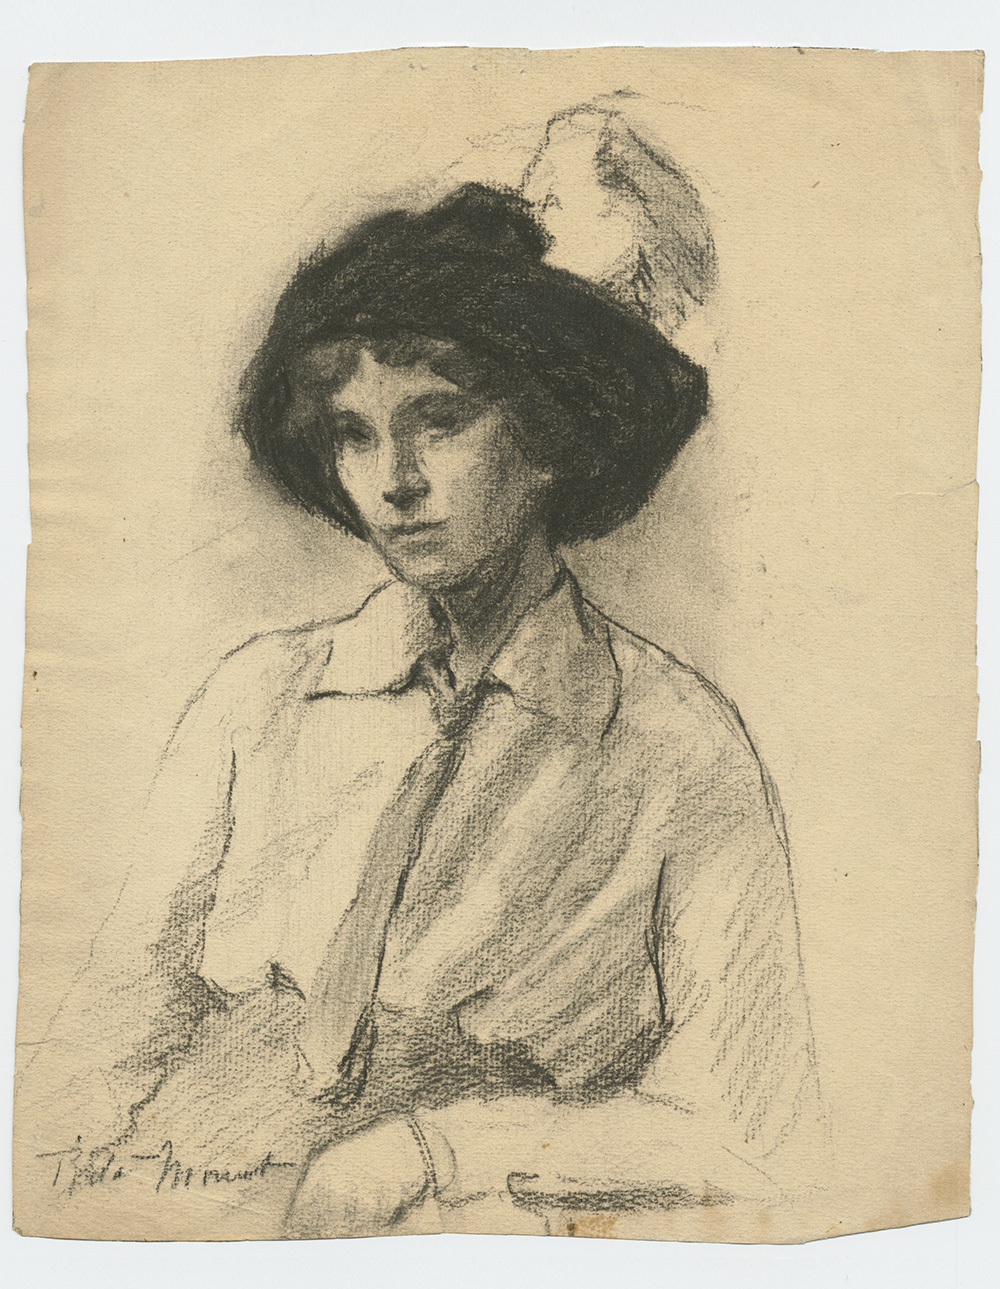 Black and white charcoal sketch portrait of a lady wearing a feathered hat, shirt and tie